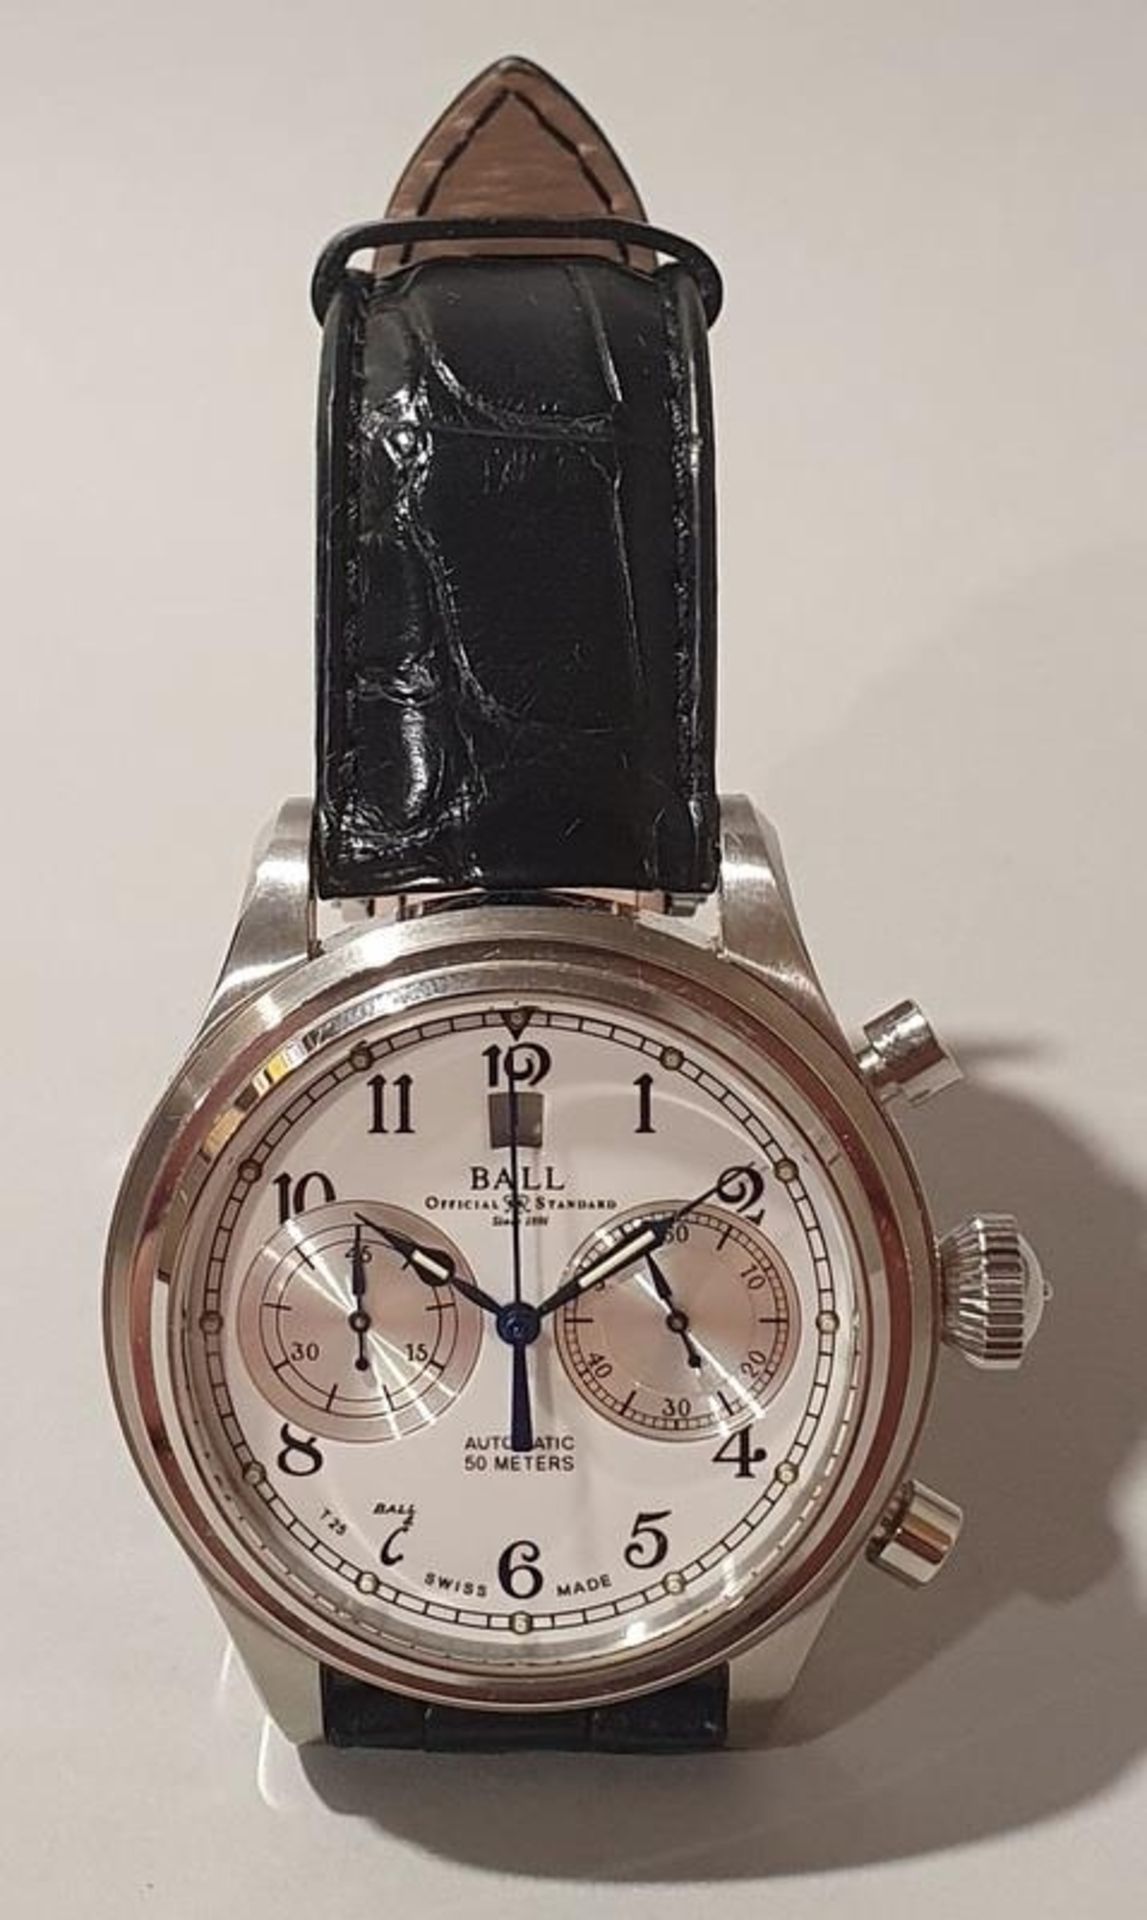 Gentleman's Automatic Chronograph Watch by Ball with box and papers. - Image 2 of 5